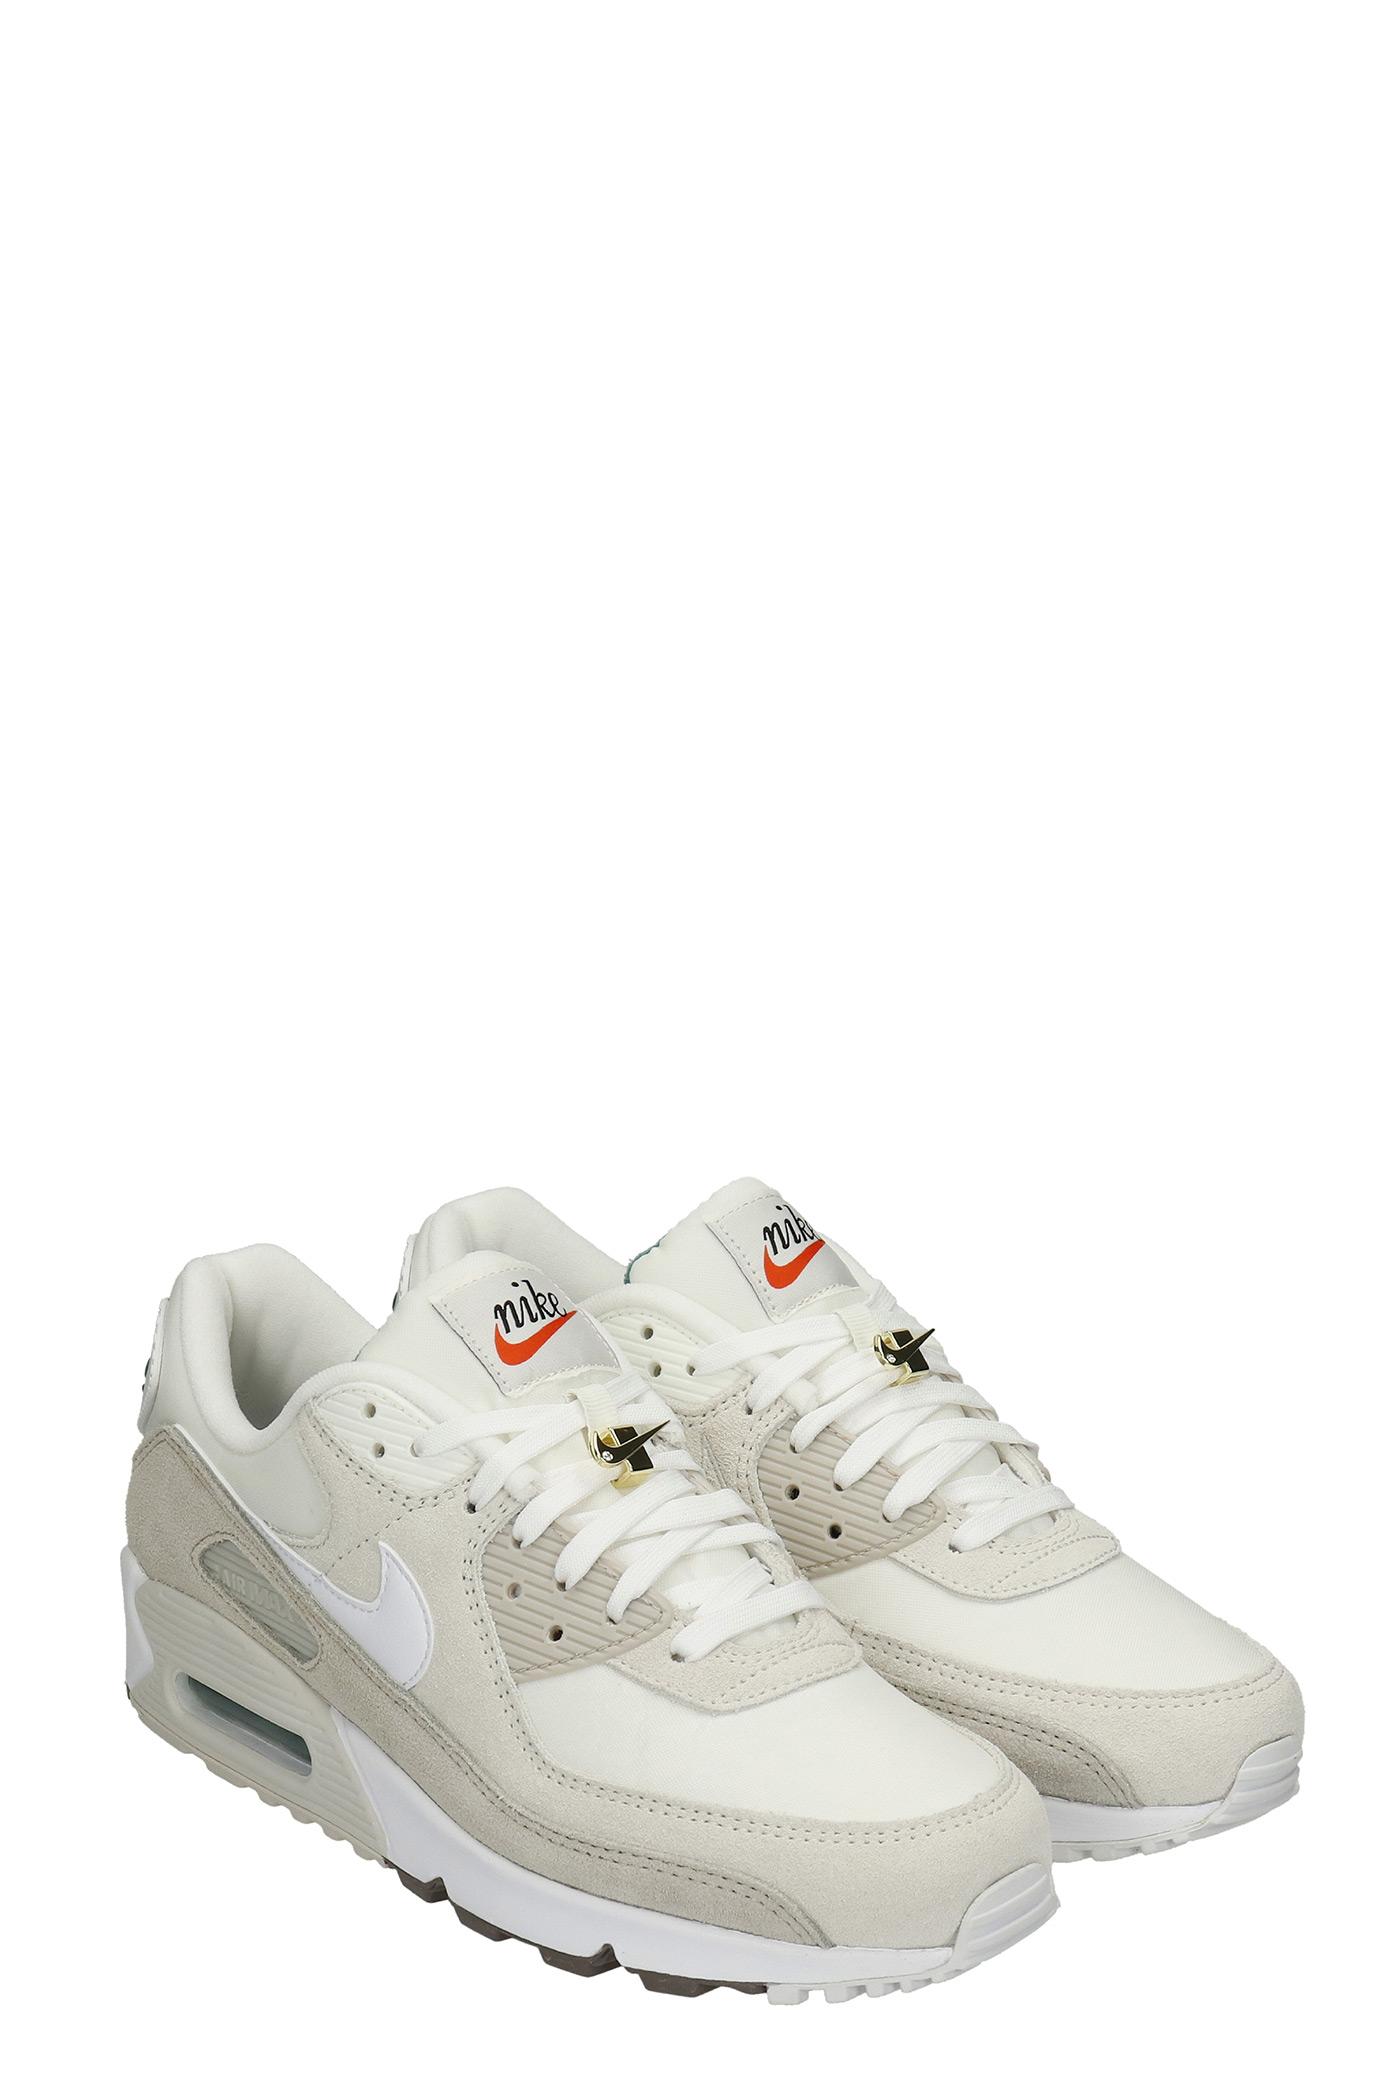 Nike Air Max 90 Se Sneakers In White Suede And Leather for Men | Lyst ان جي